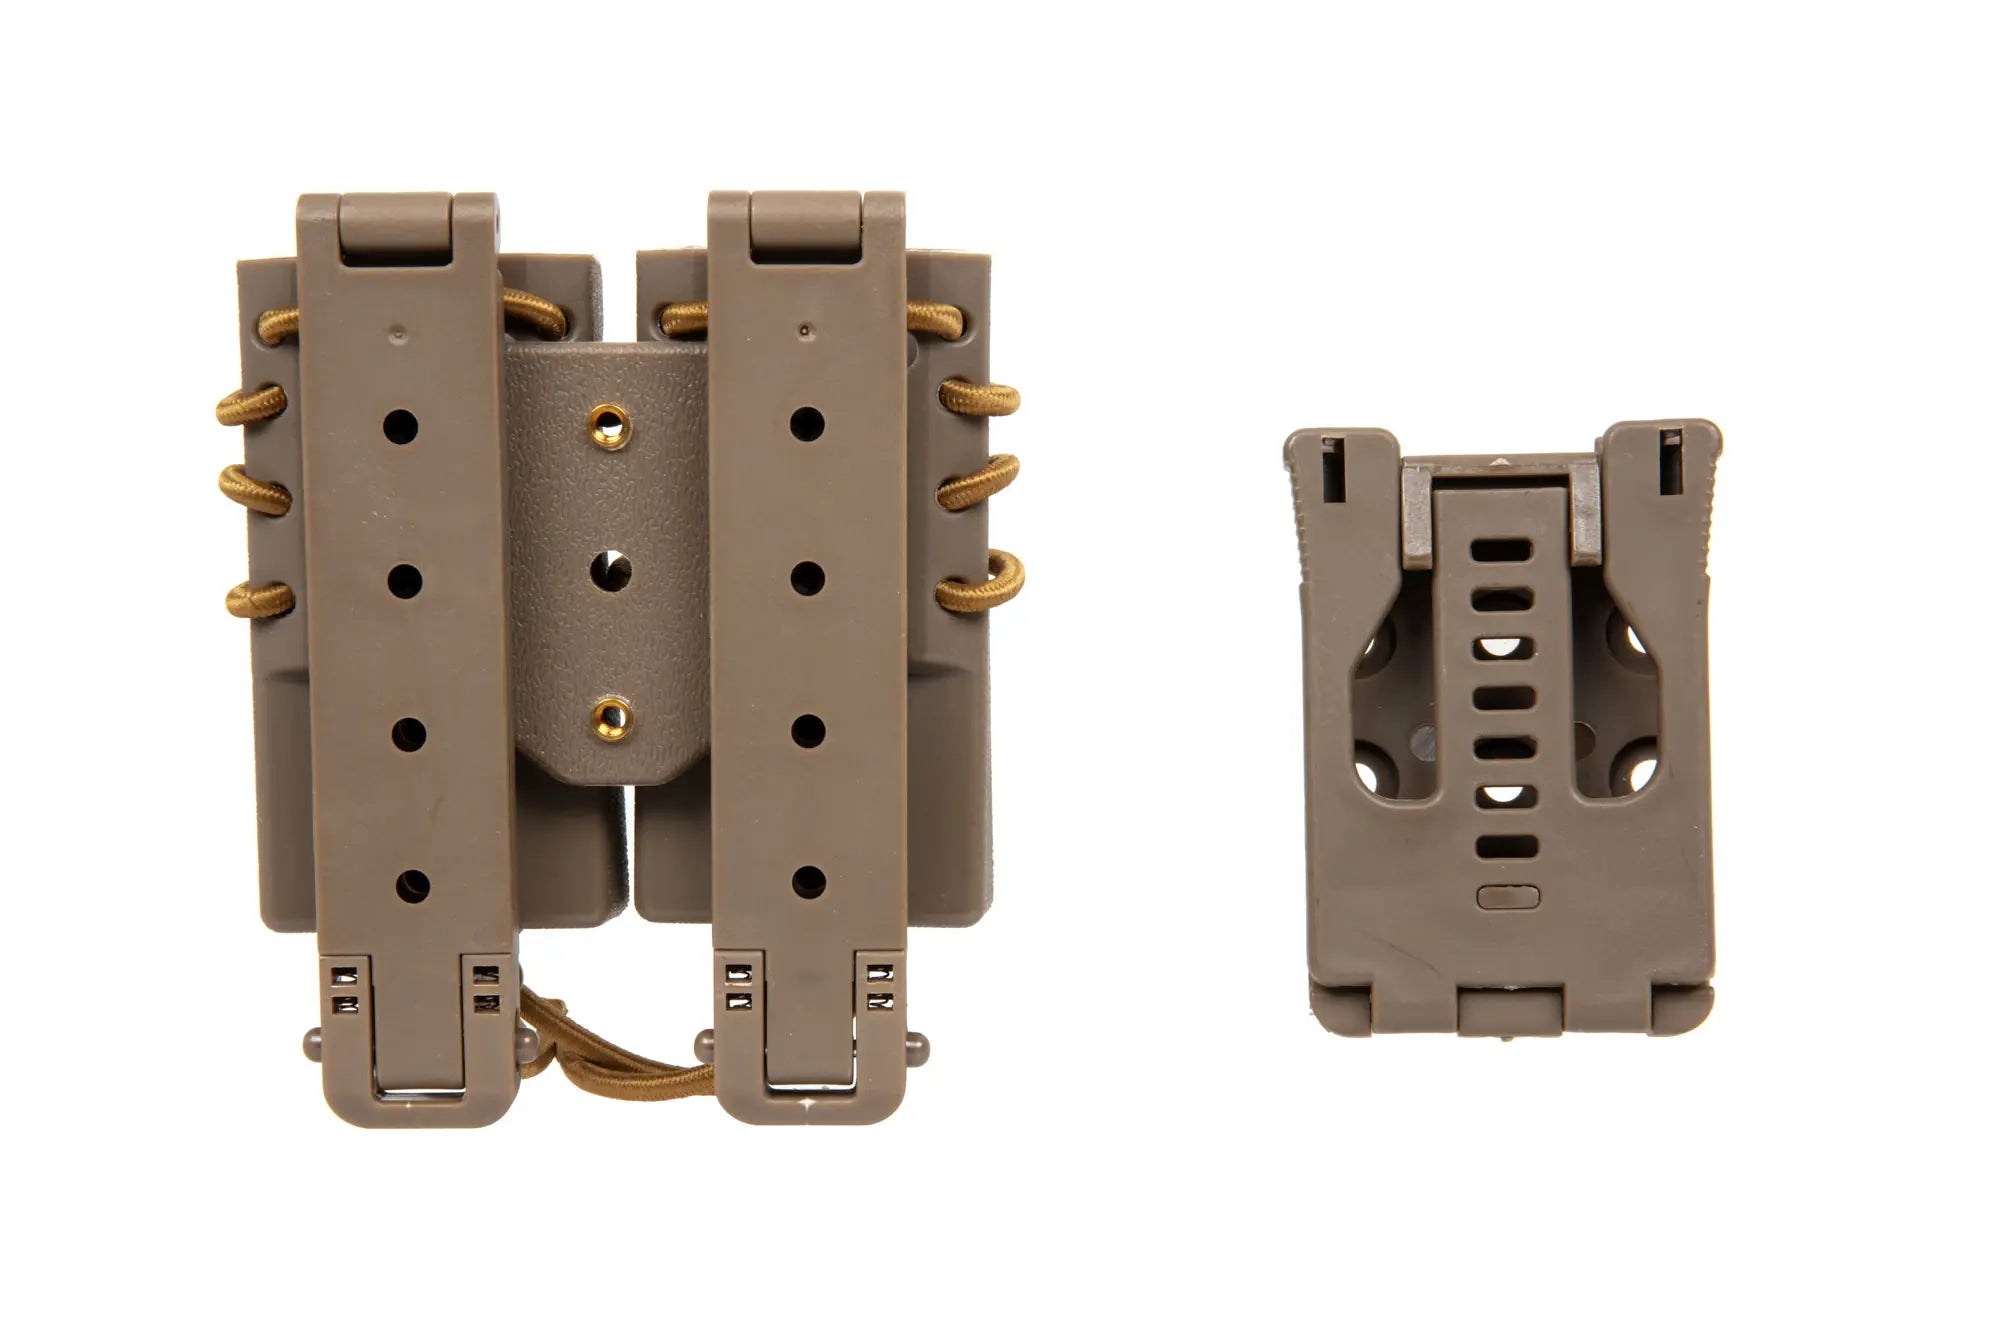 Carrier for 2 9mm magazines Wosport Urban Assault Quick Pull Tan